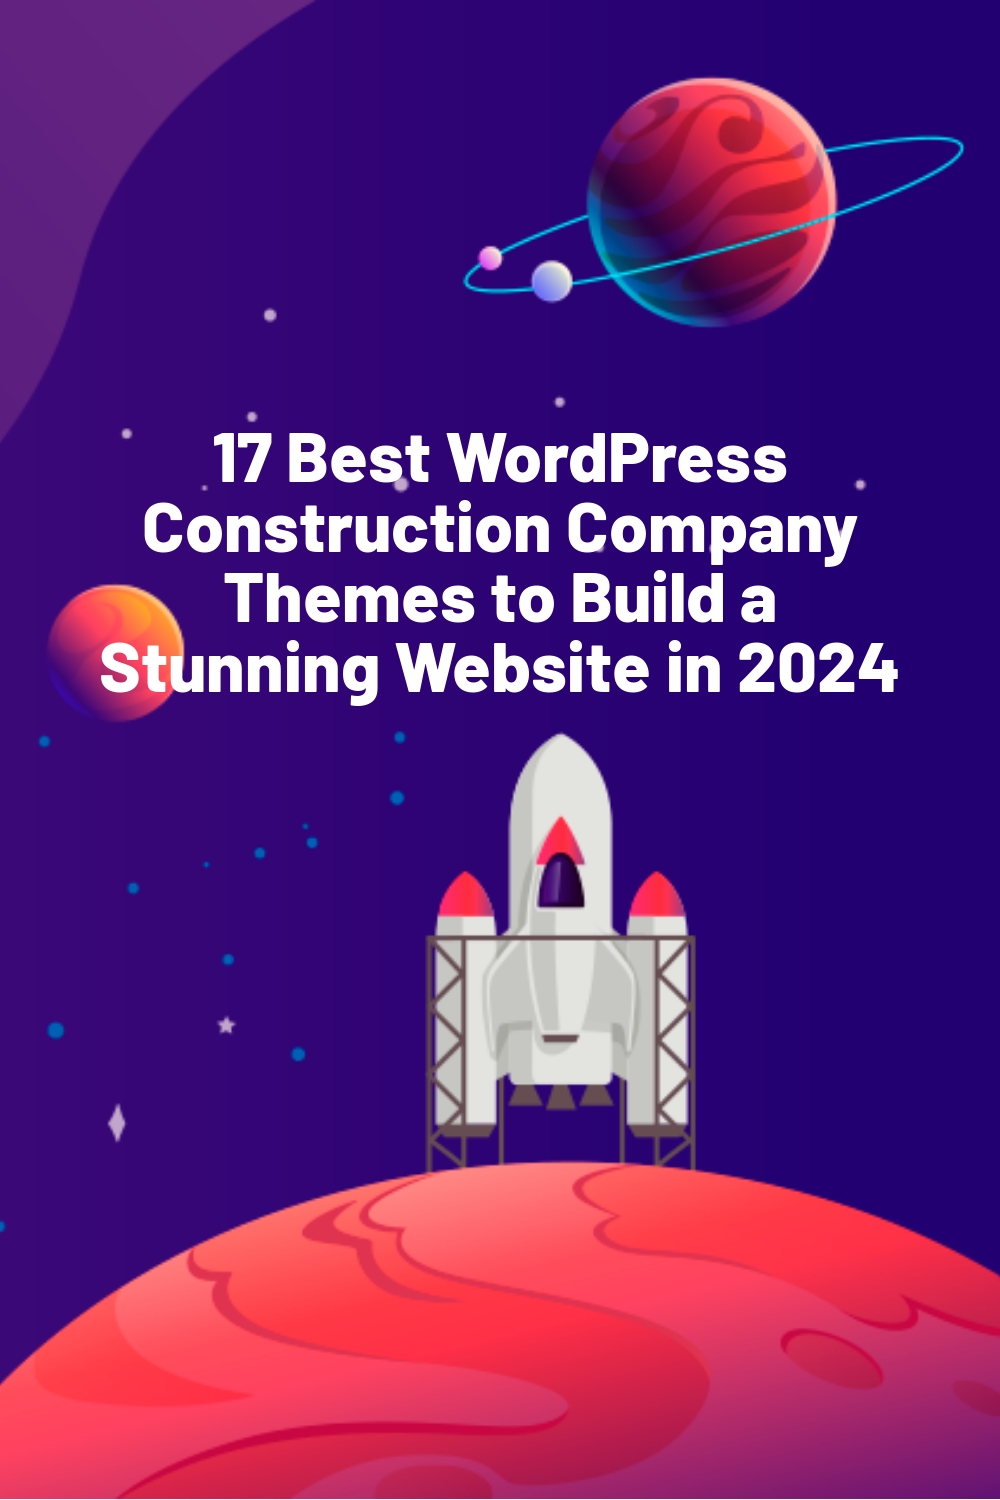 17 Best WordPress Construction Company Themes to Build a Stunning Website in 2024